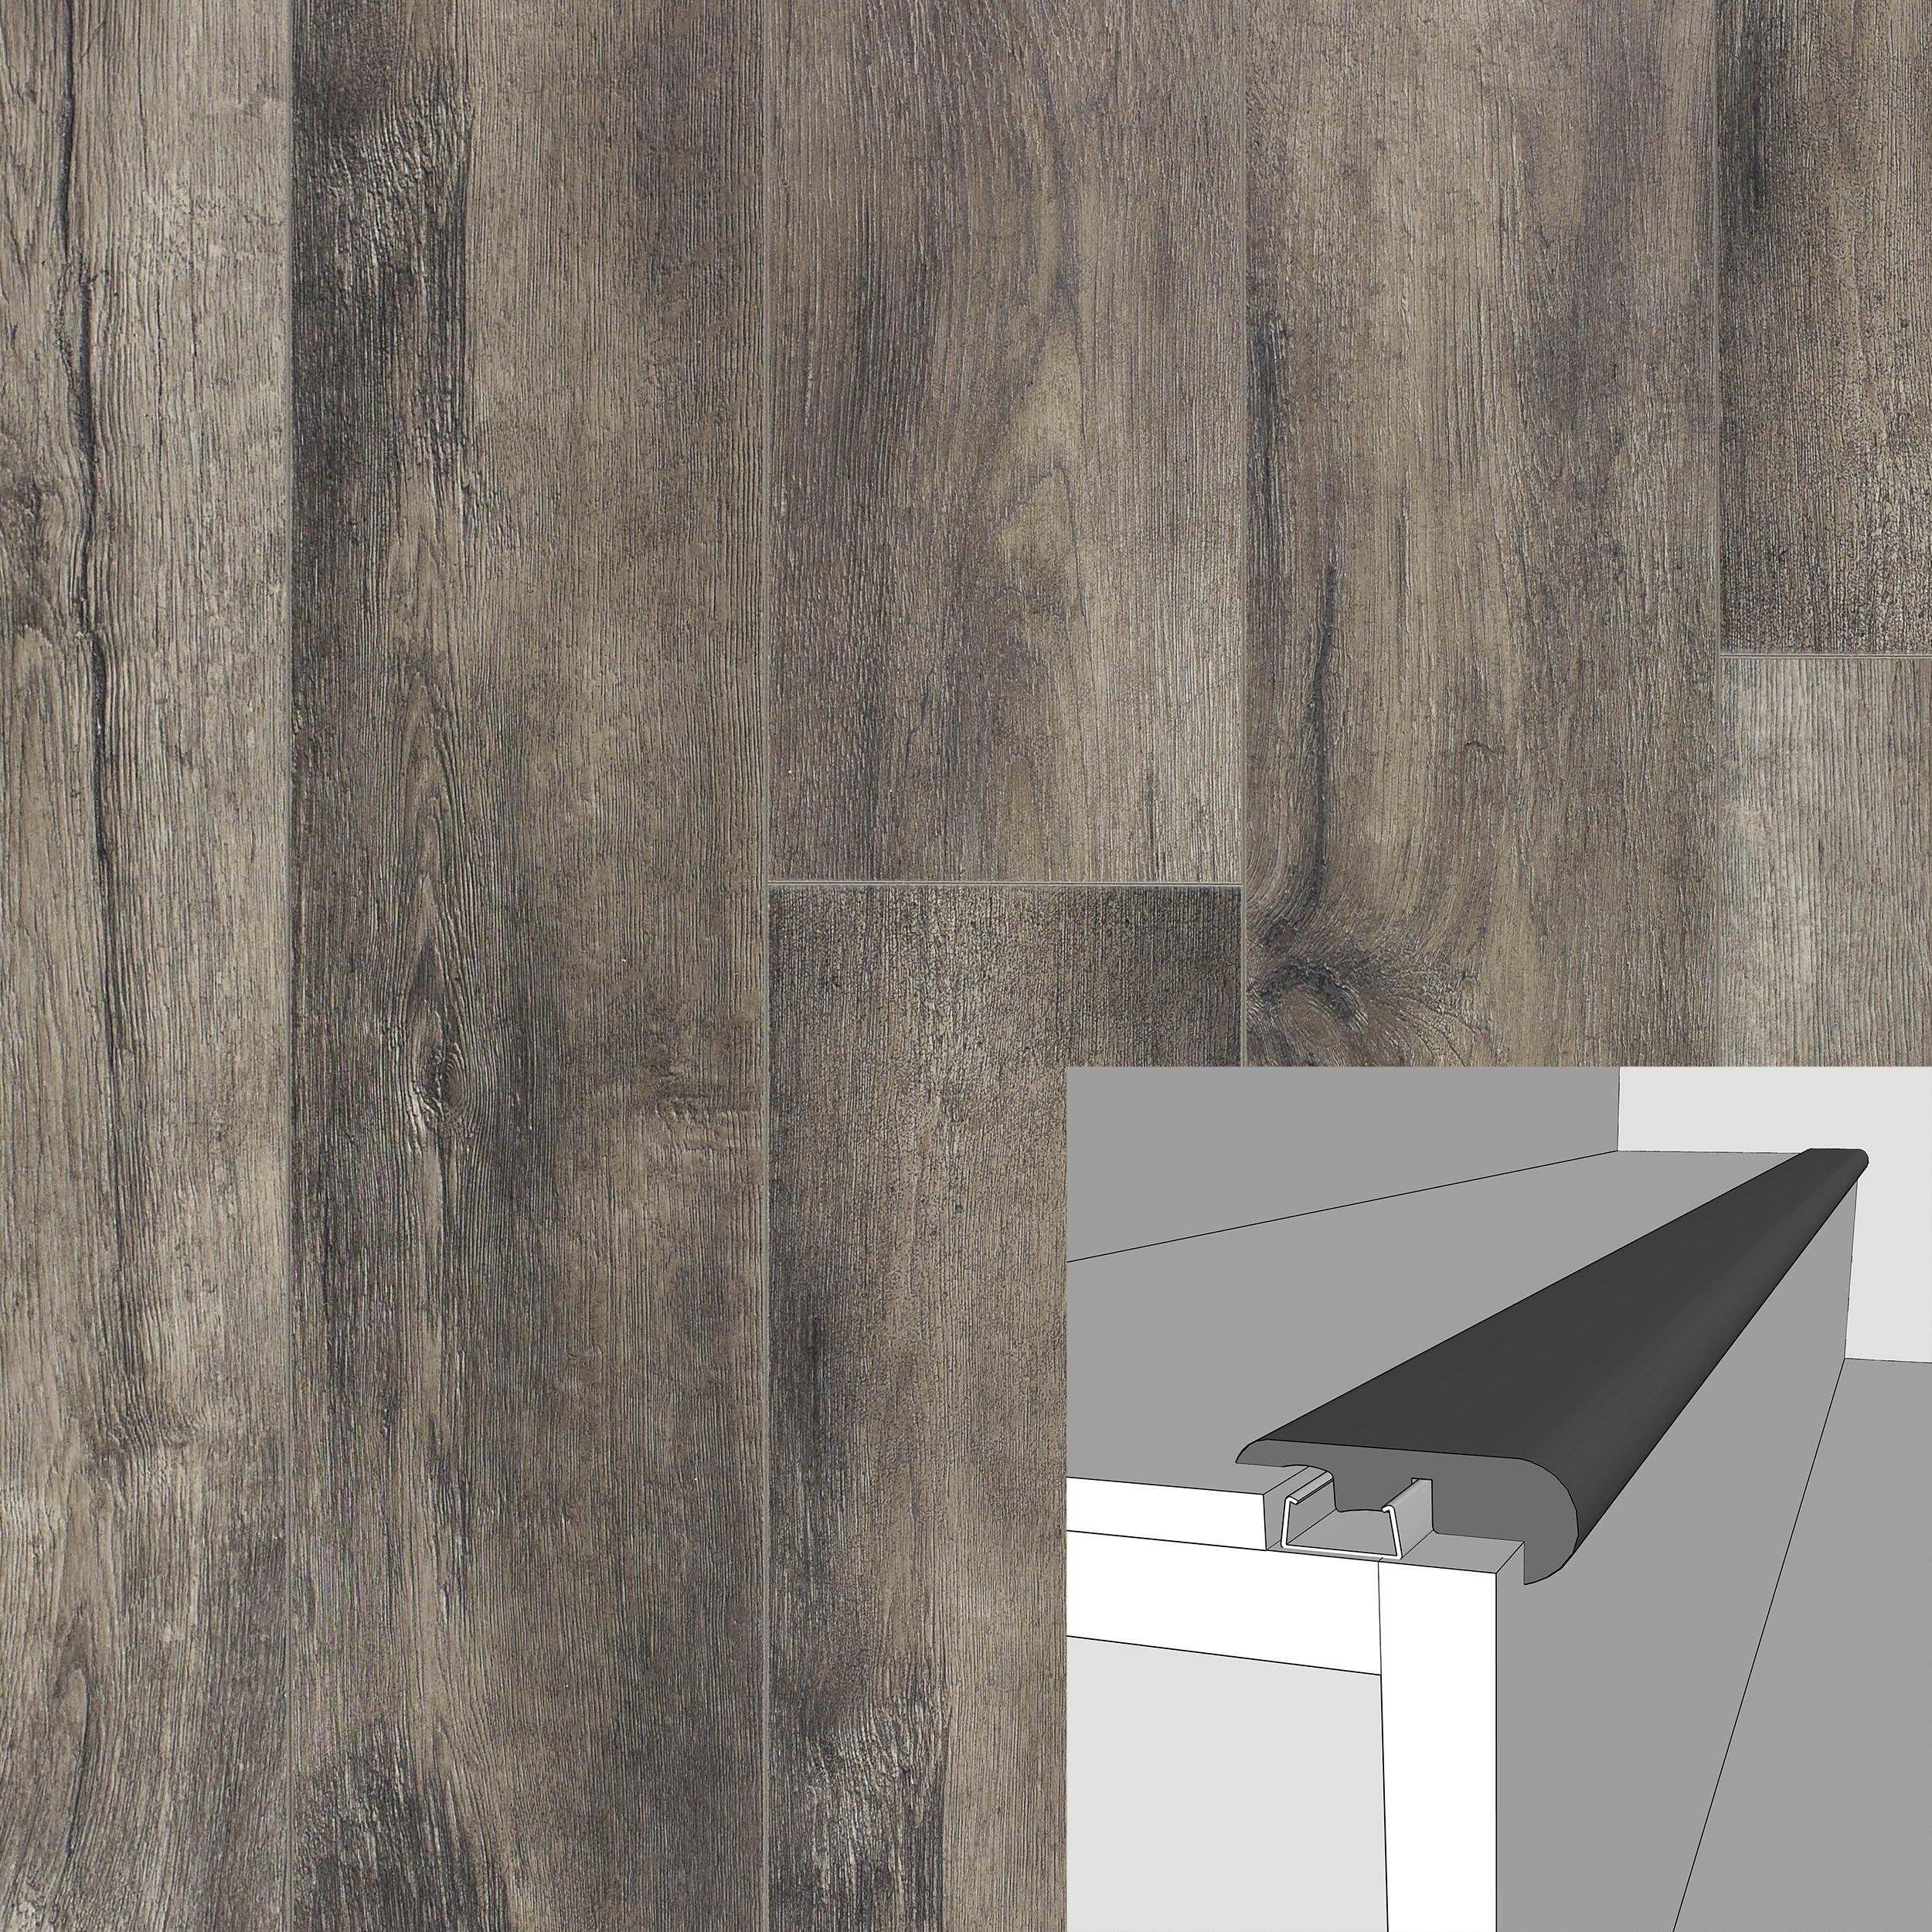 Stone Canyon Oak 94in. Laminate Overlapping Stair Nose